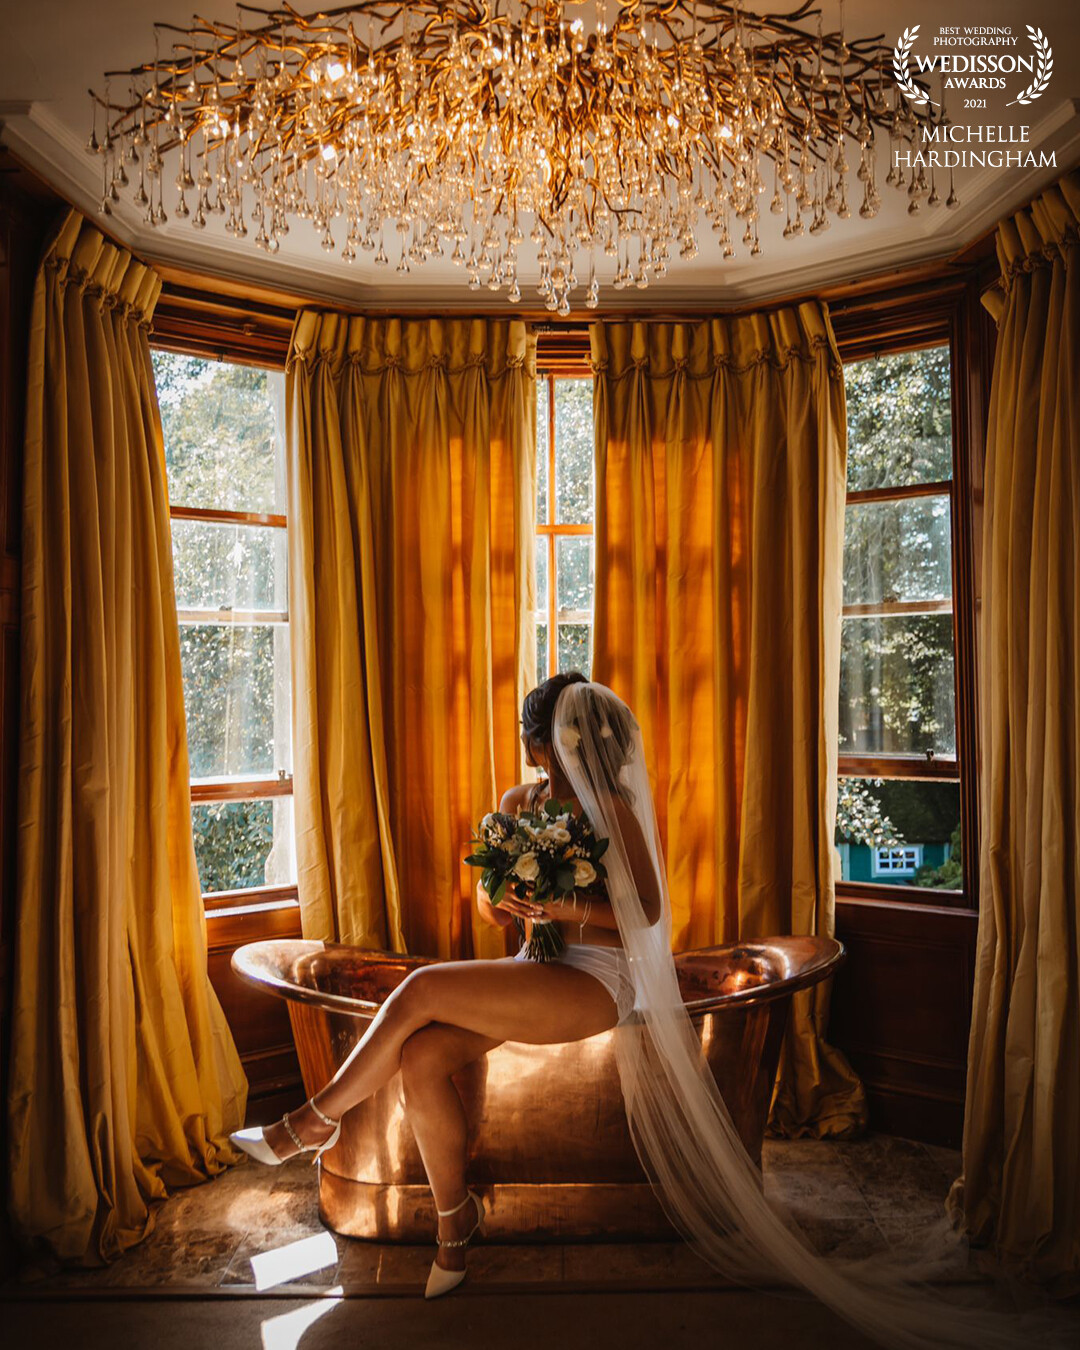 My beautiful bride Vicky absolutely nailed her wedding boudoir.  A moment just us, away from the expected wedding preparation chaos to give her this stunning image. Shot in the stunning bridal suite at the perfectly picturesque, luxury wedding venue that is Branxholm Park.